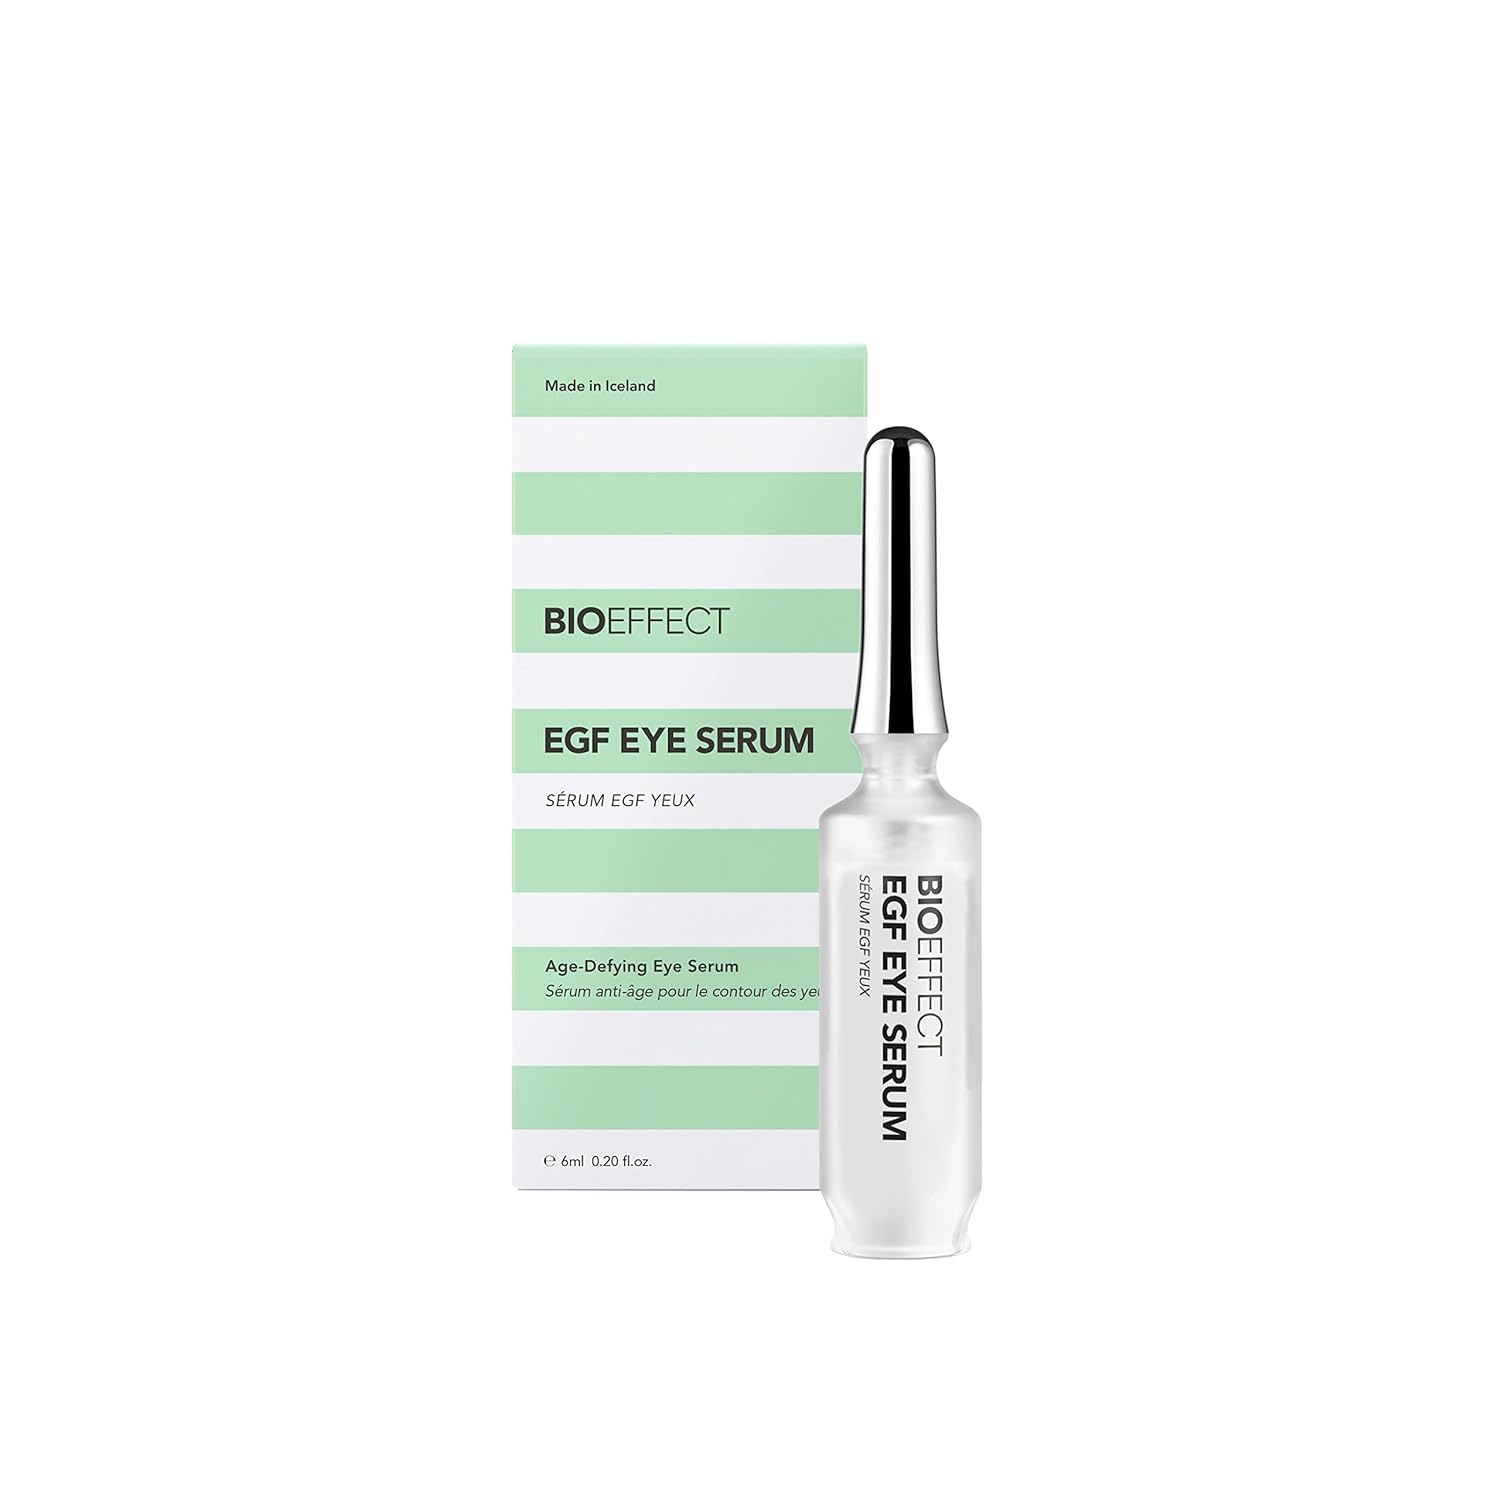 BIOEFFECT EGF Eye Serum with De-Puffer Rollerball, Anti-Aging, Moisturizing Contour Gel To Visibly Reduce Wrinkles, Puffiness, Fine Lines with Barley Growth-Factor Protein